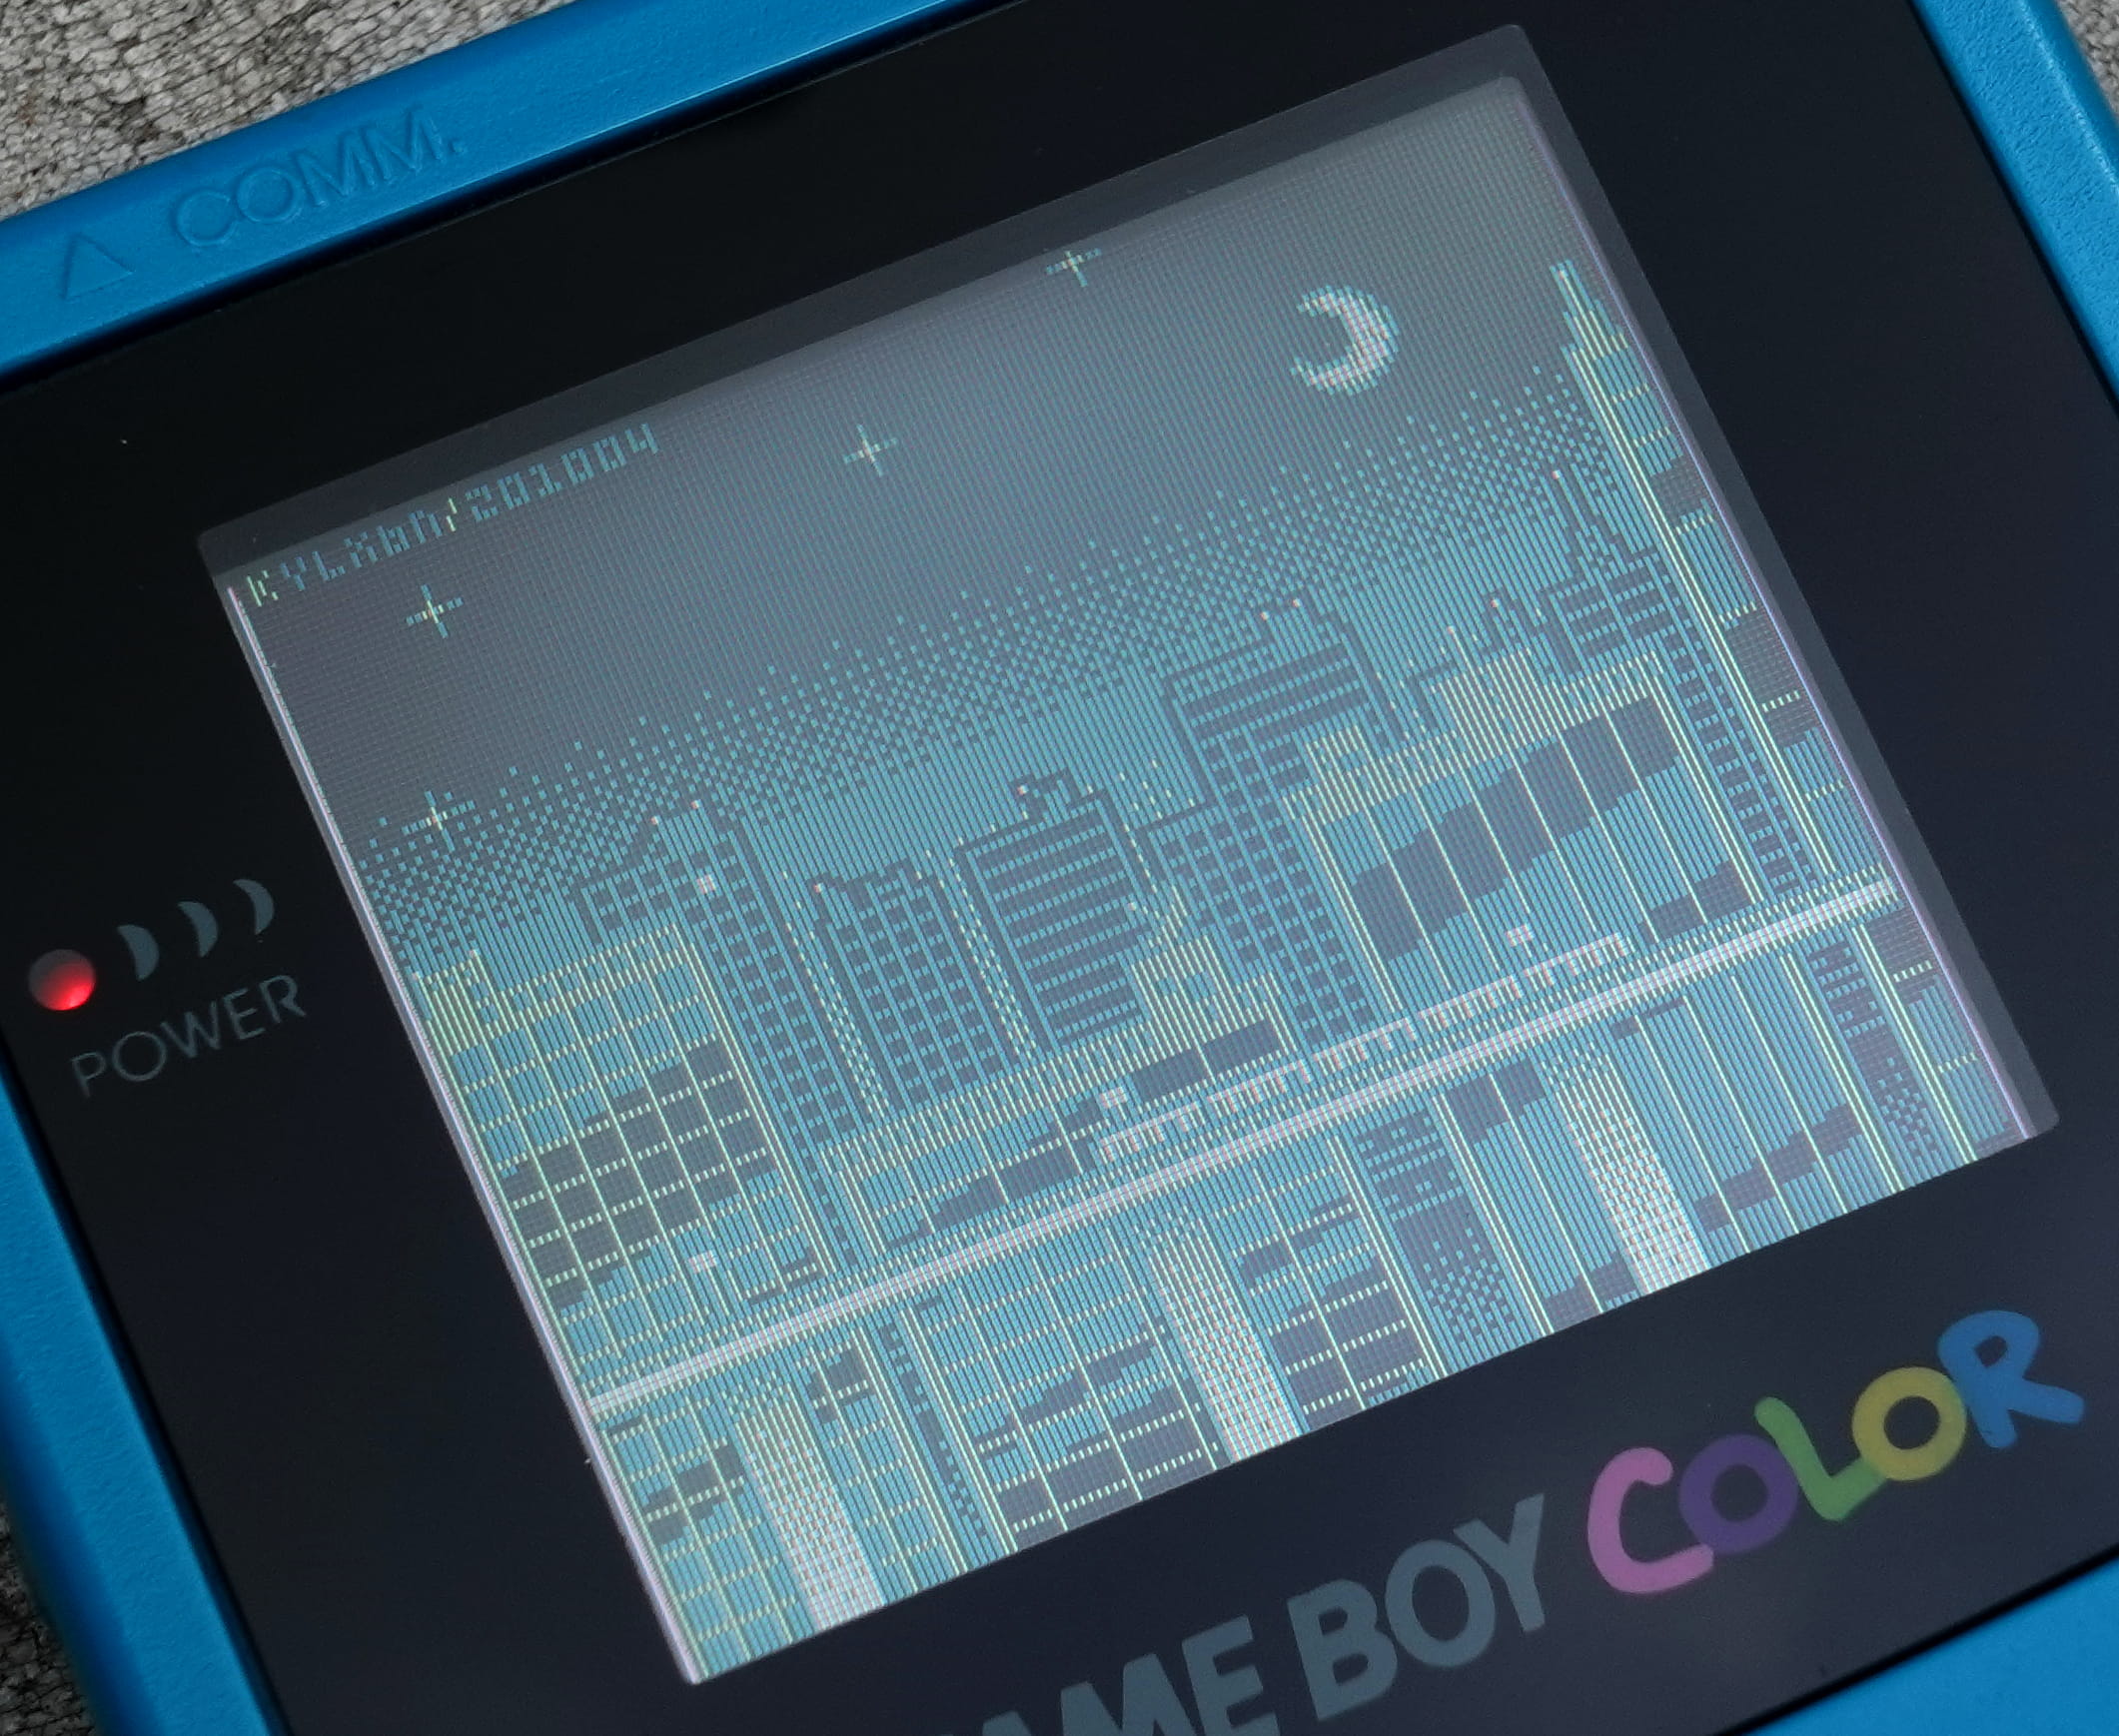 Picture of a Game Boy Color screen showing pixel art